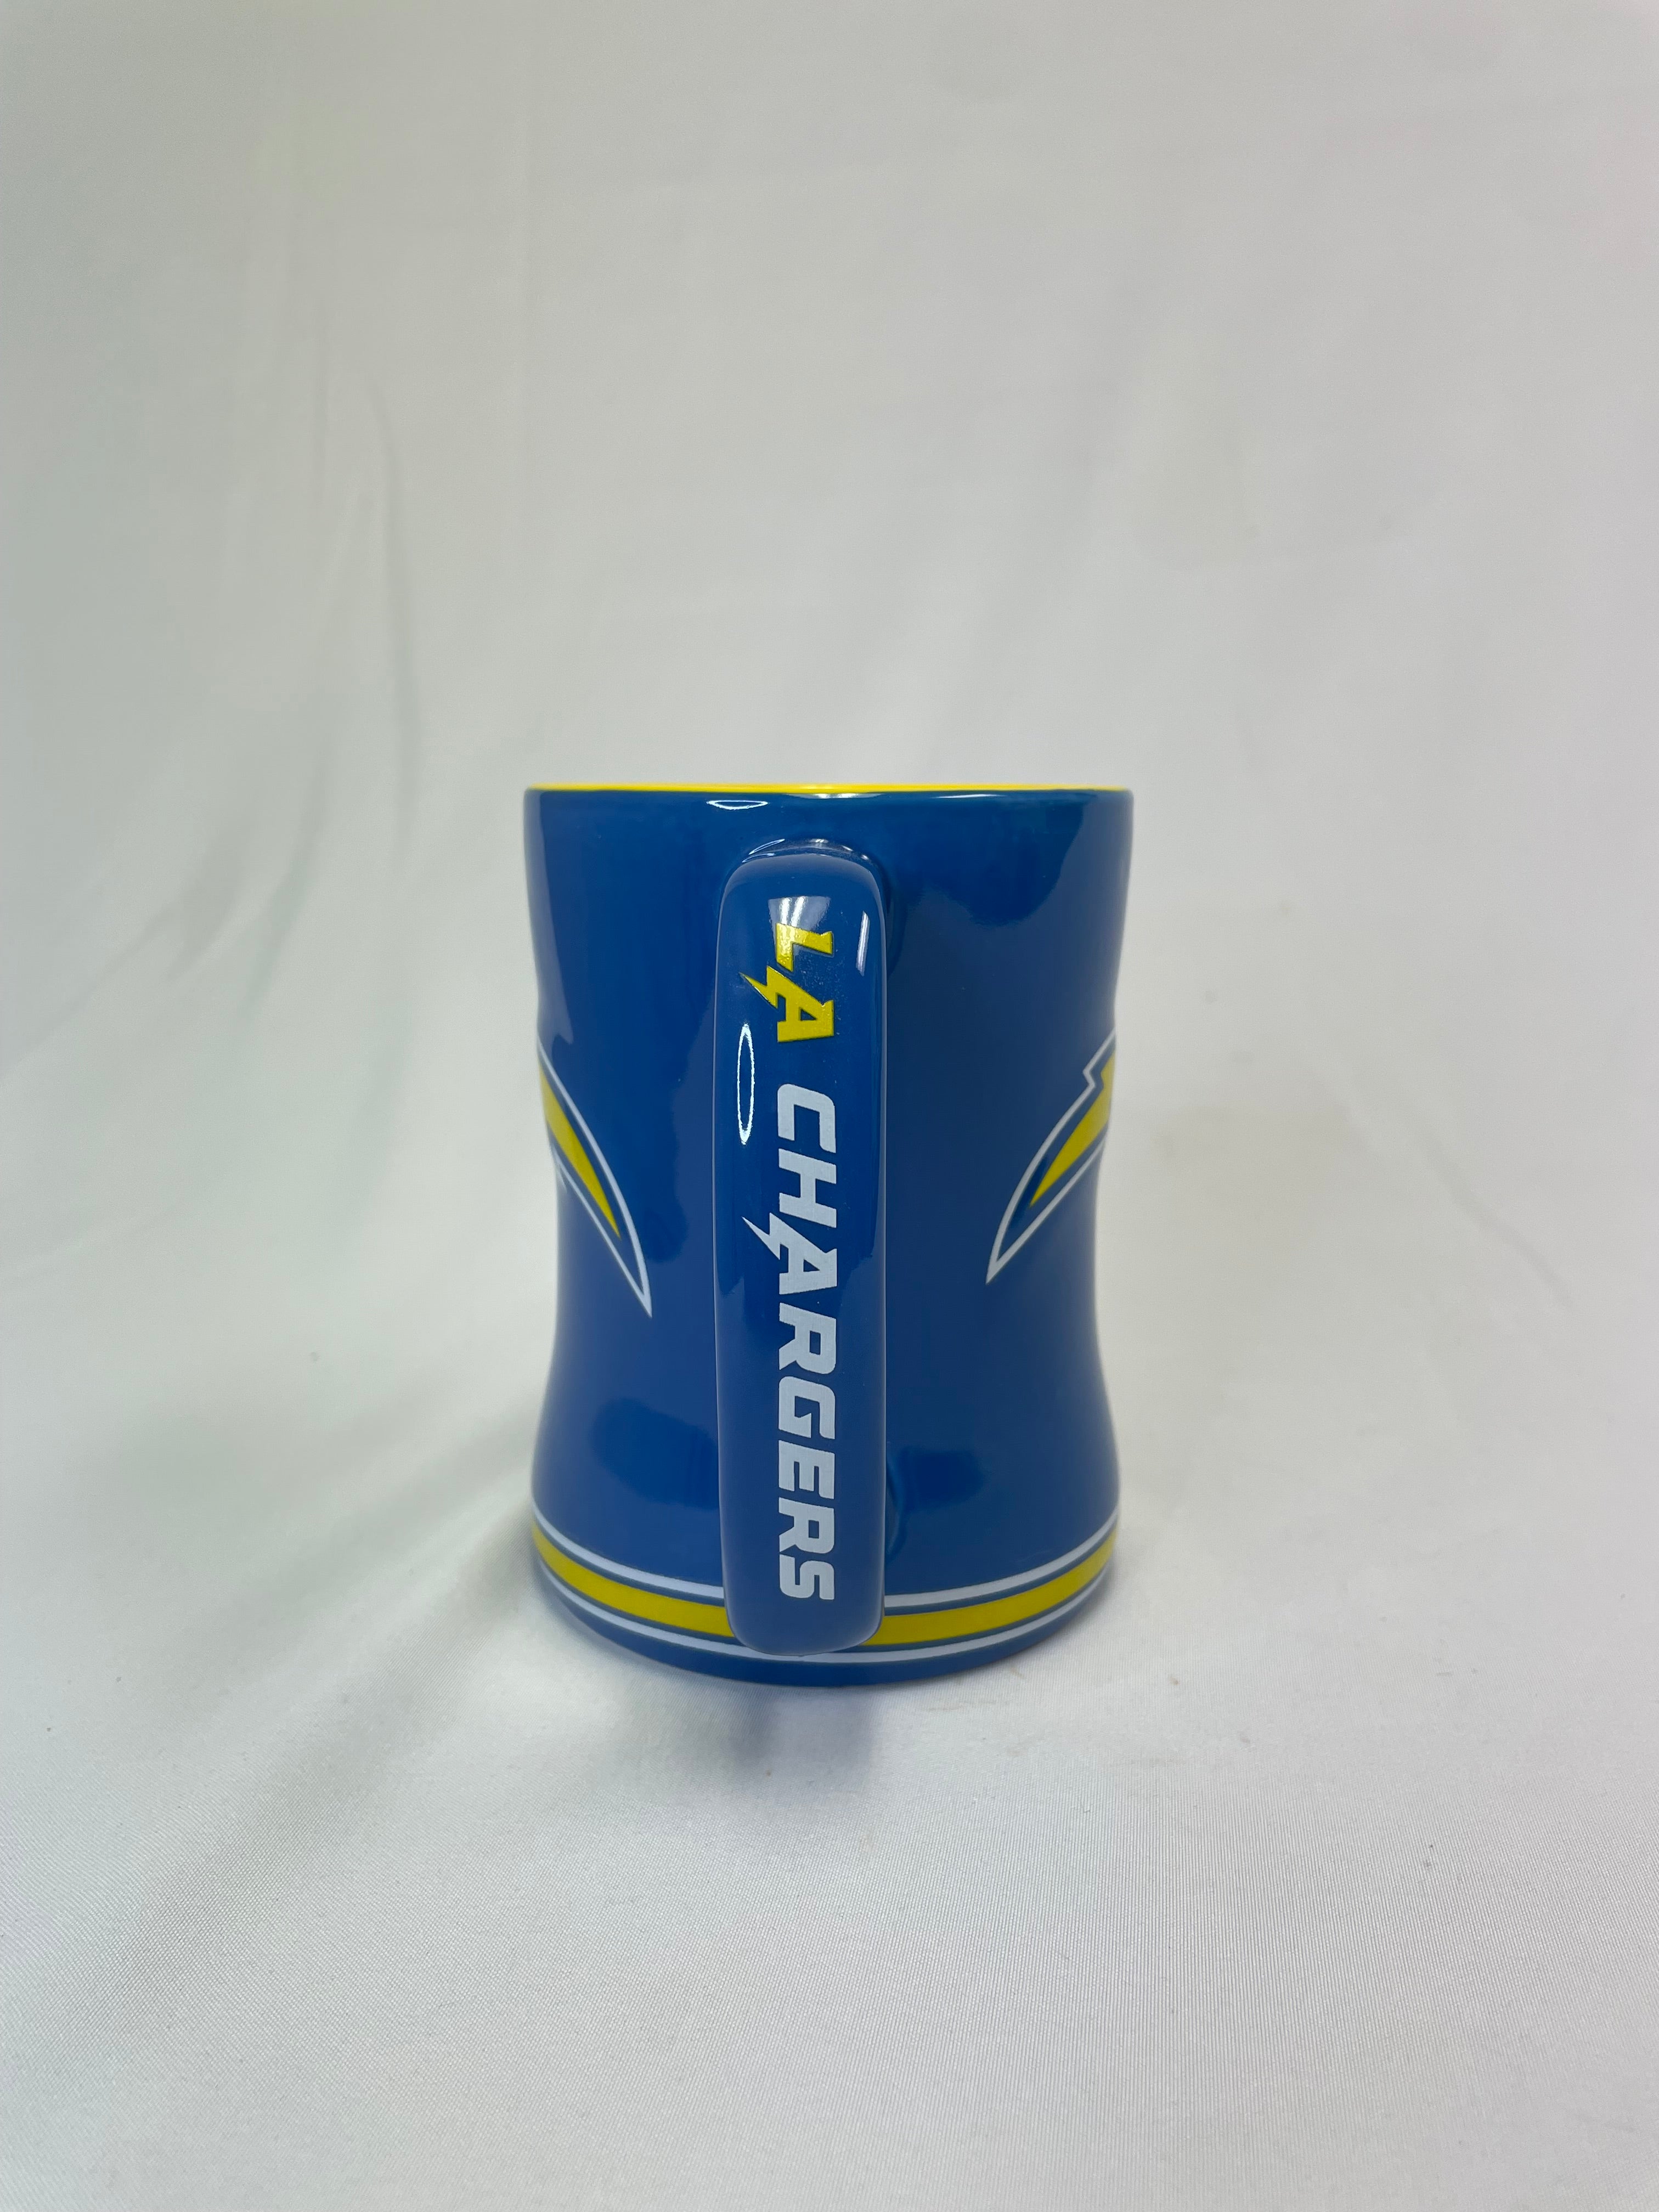 Los Angeles Chargers 14oz Relief Mug